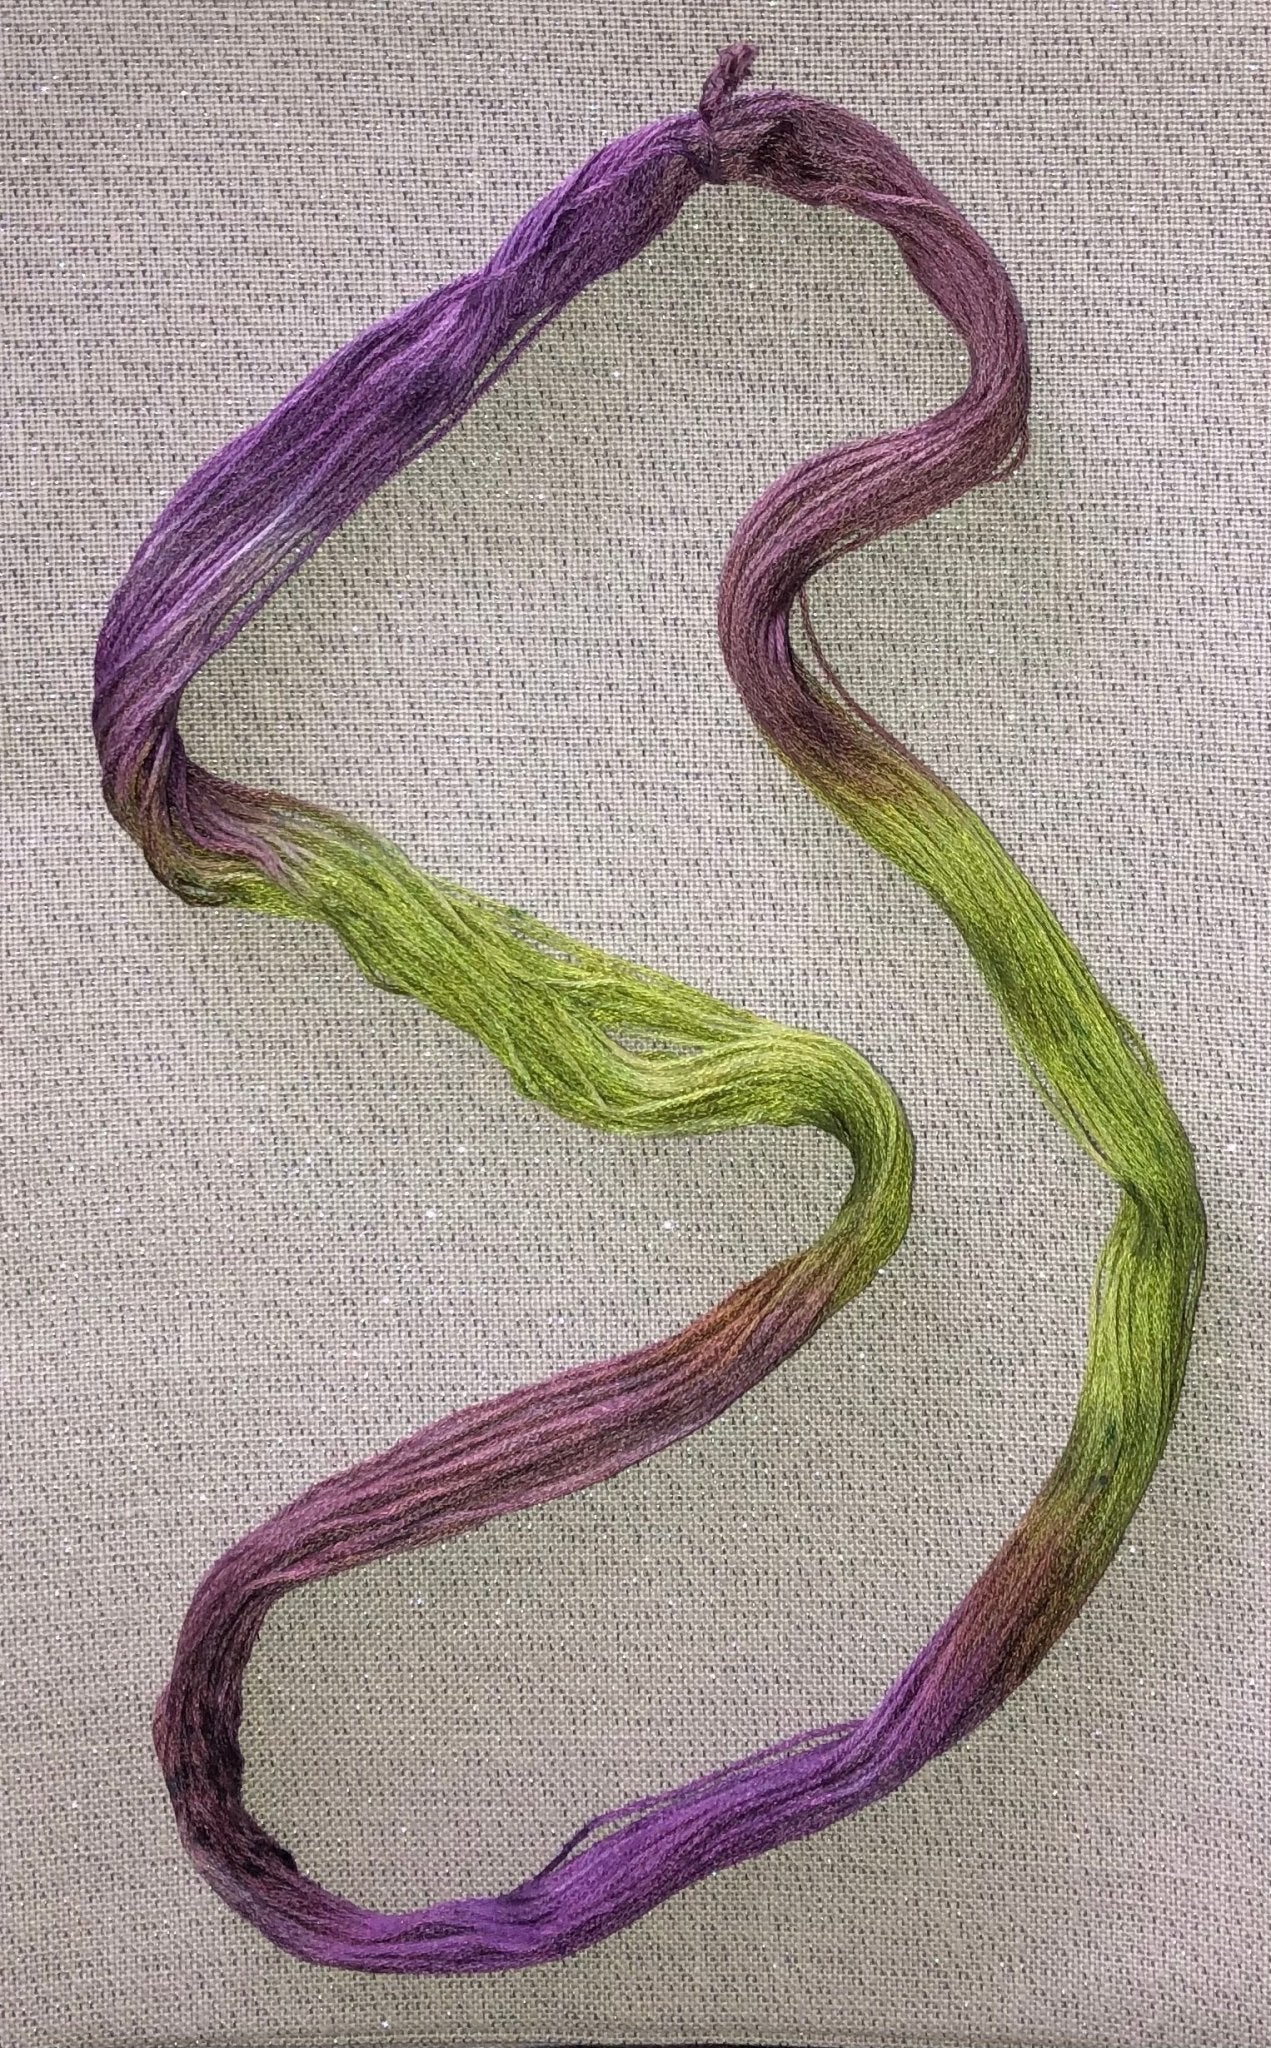 Silk hand dyed floss - Iris - Dyeing for Cross Stitch